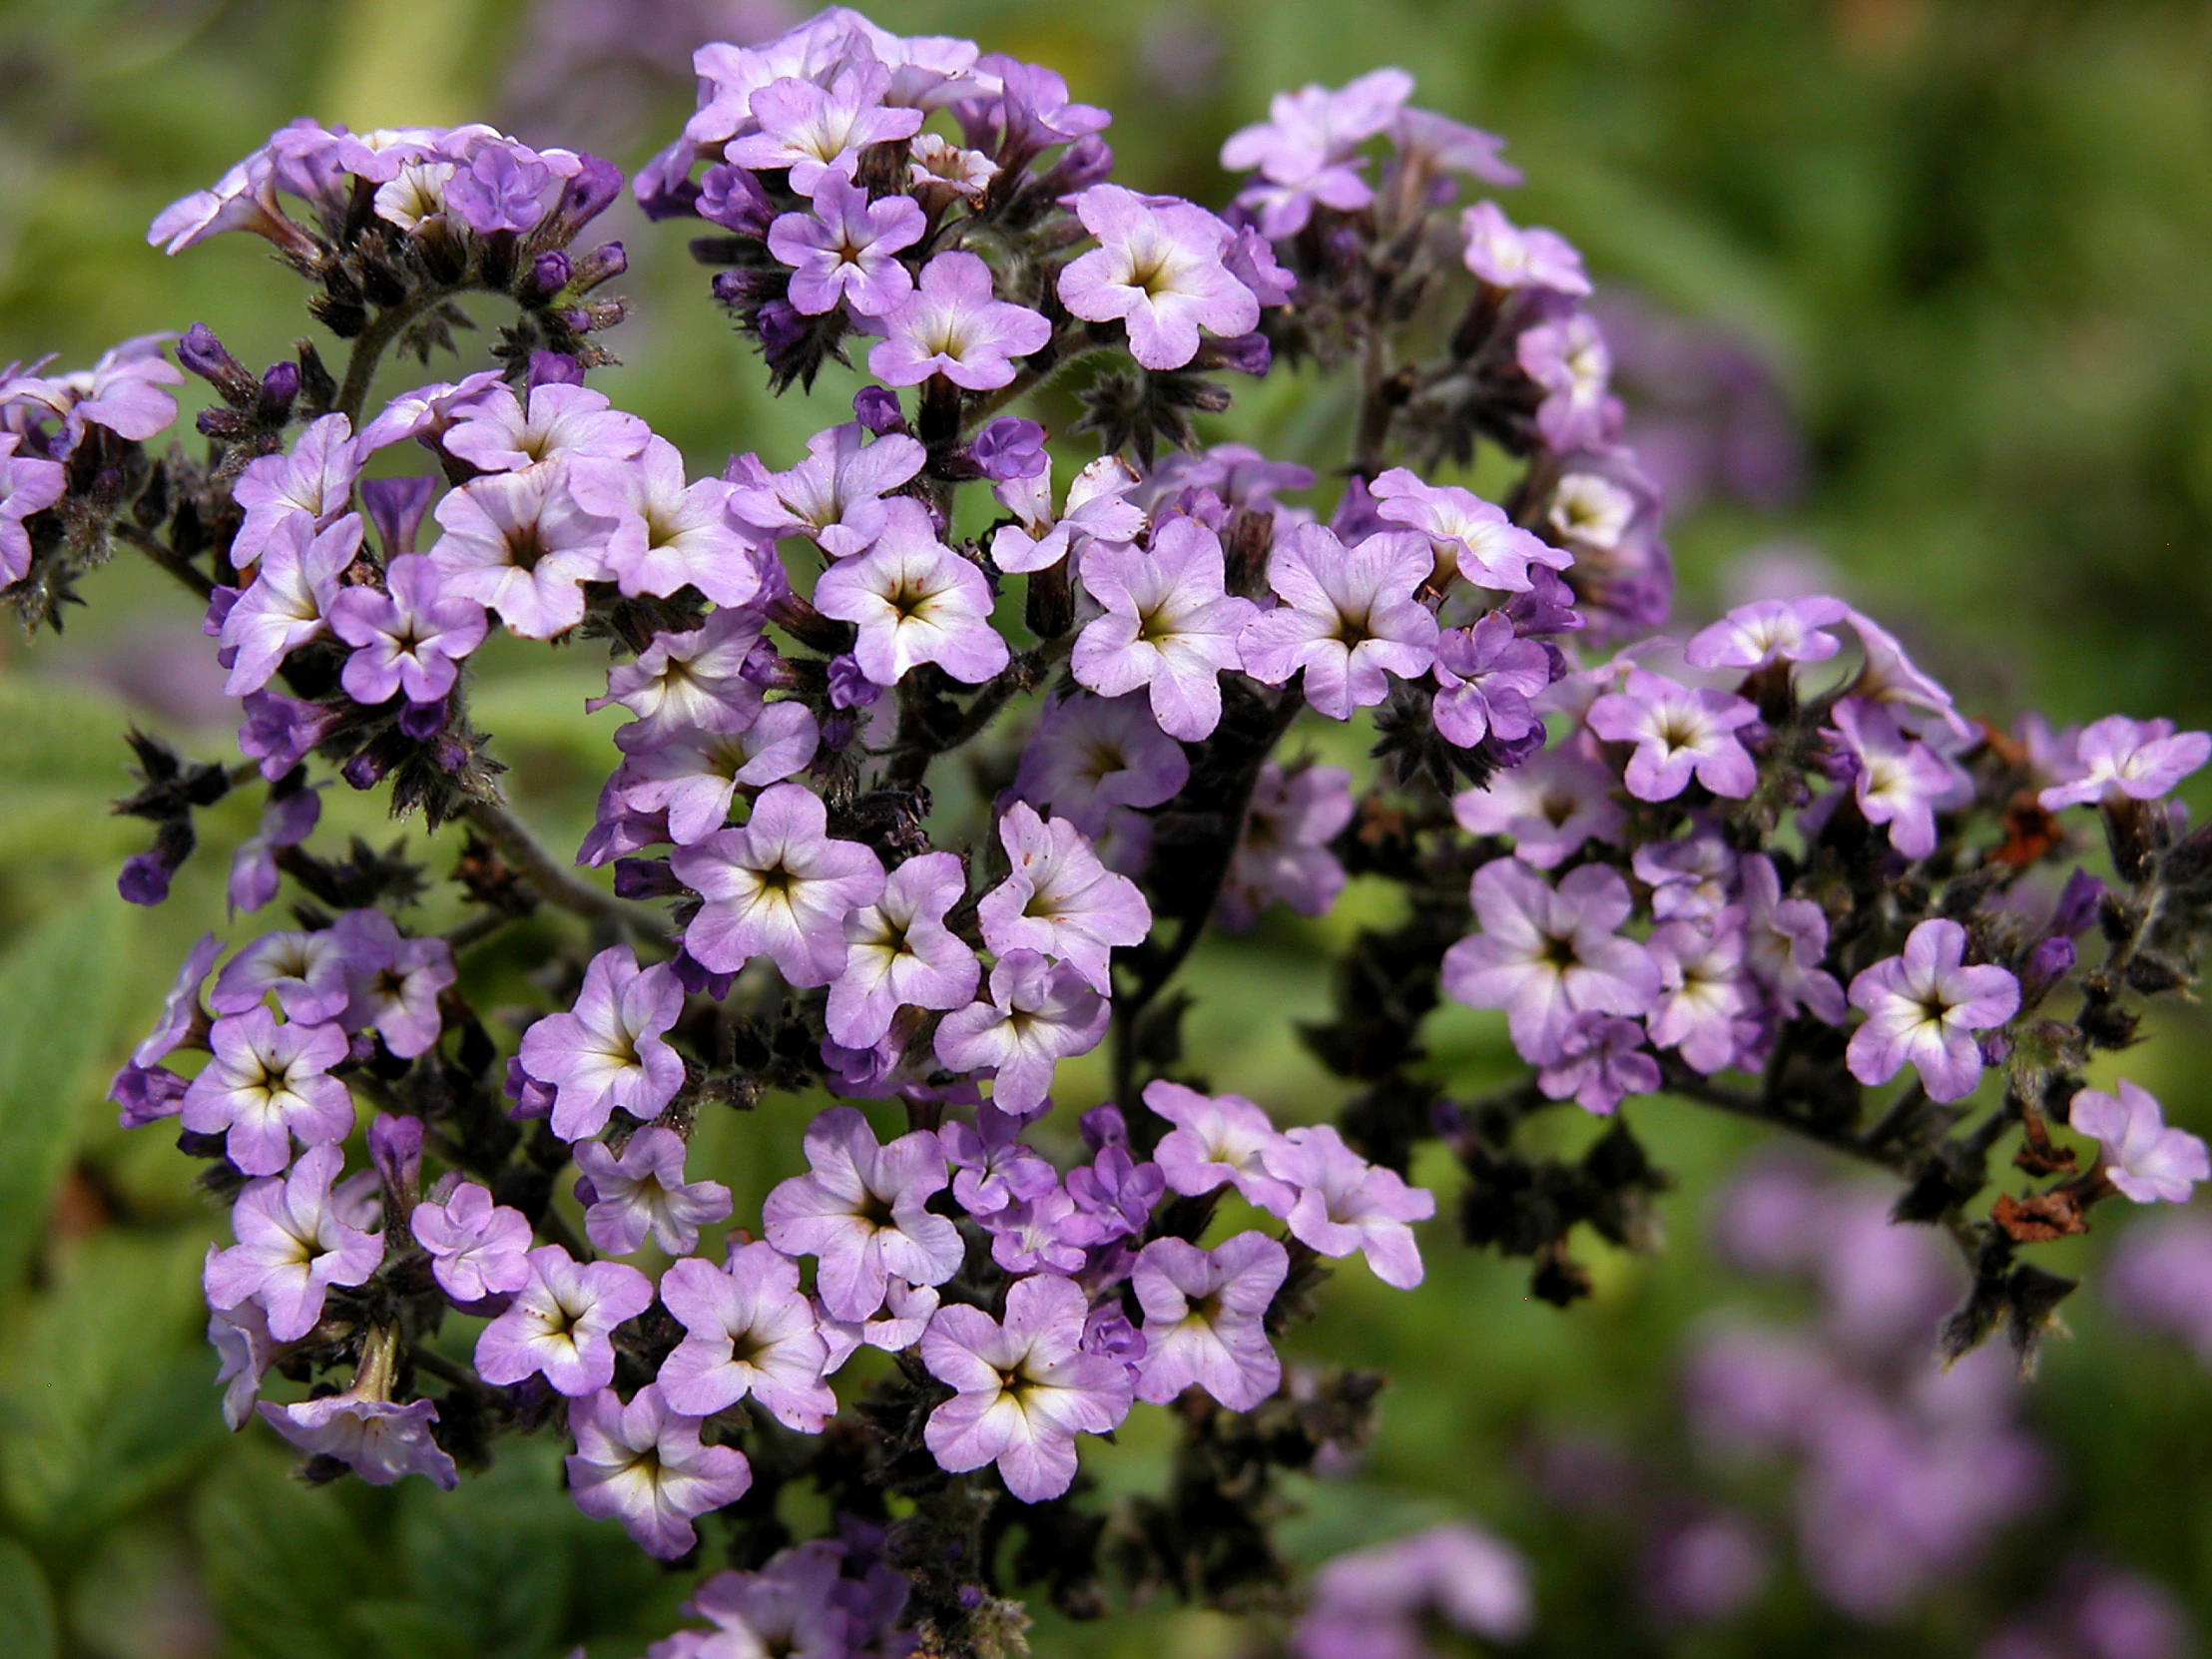 purple flowers blooming in a bush with green background